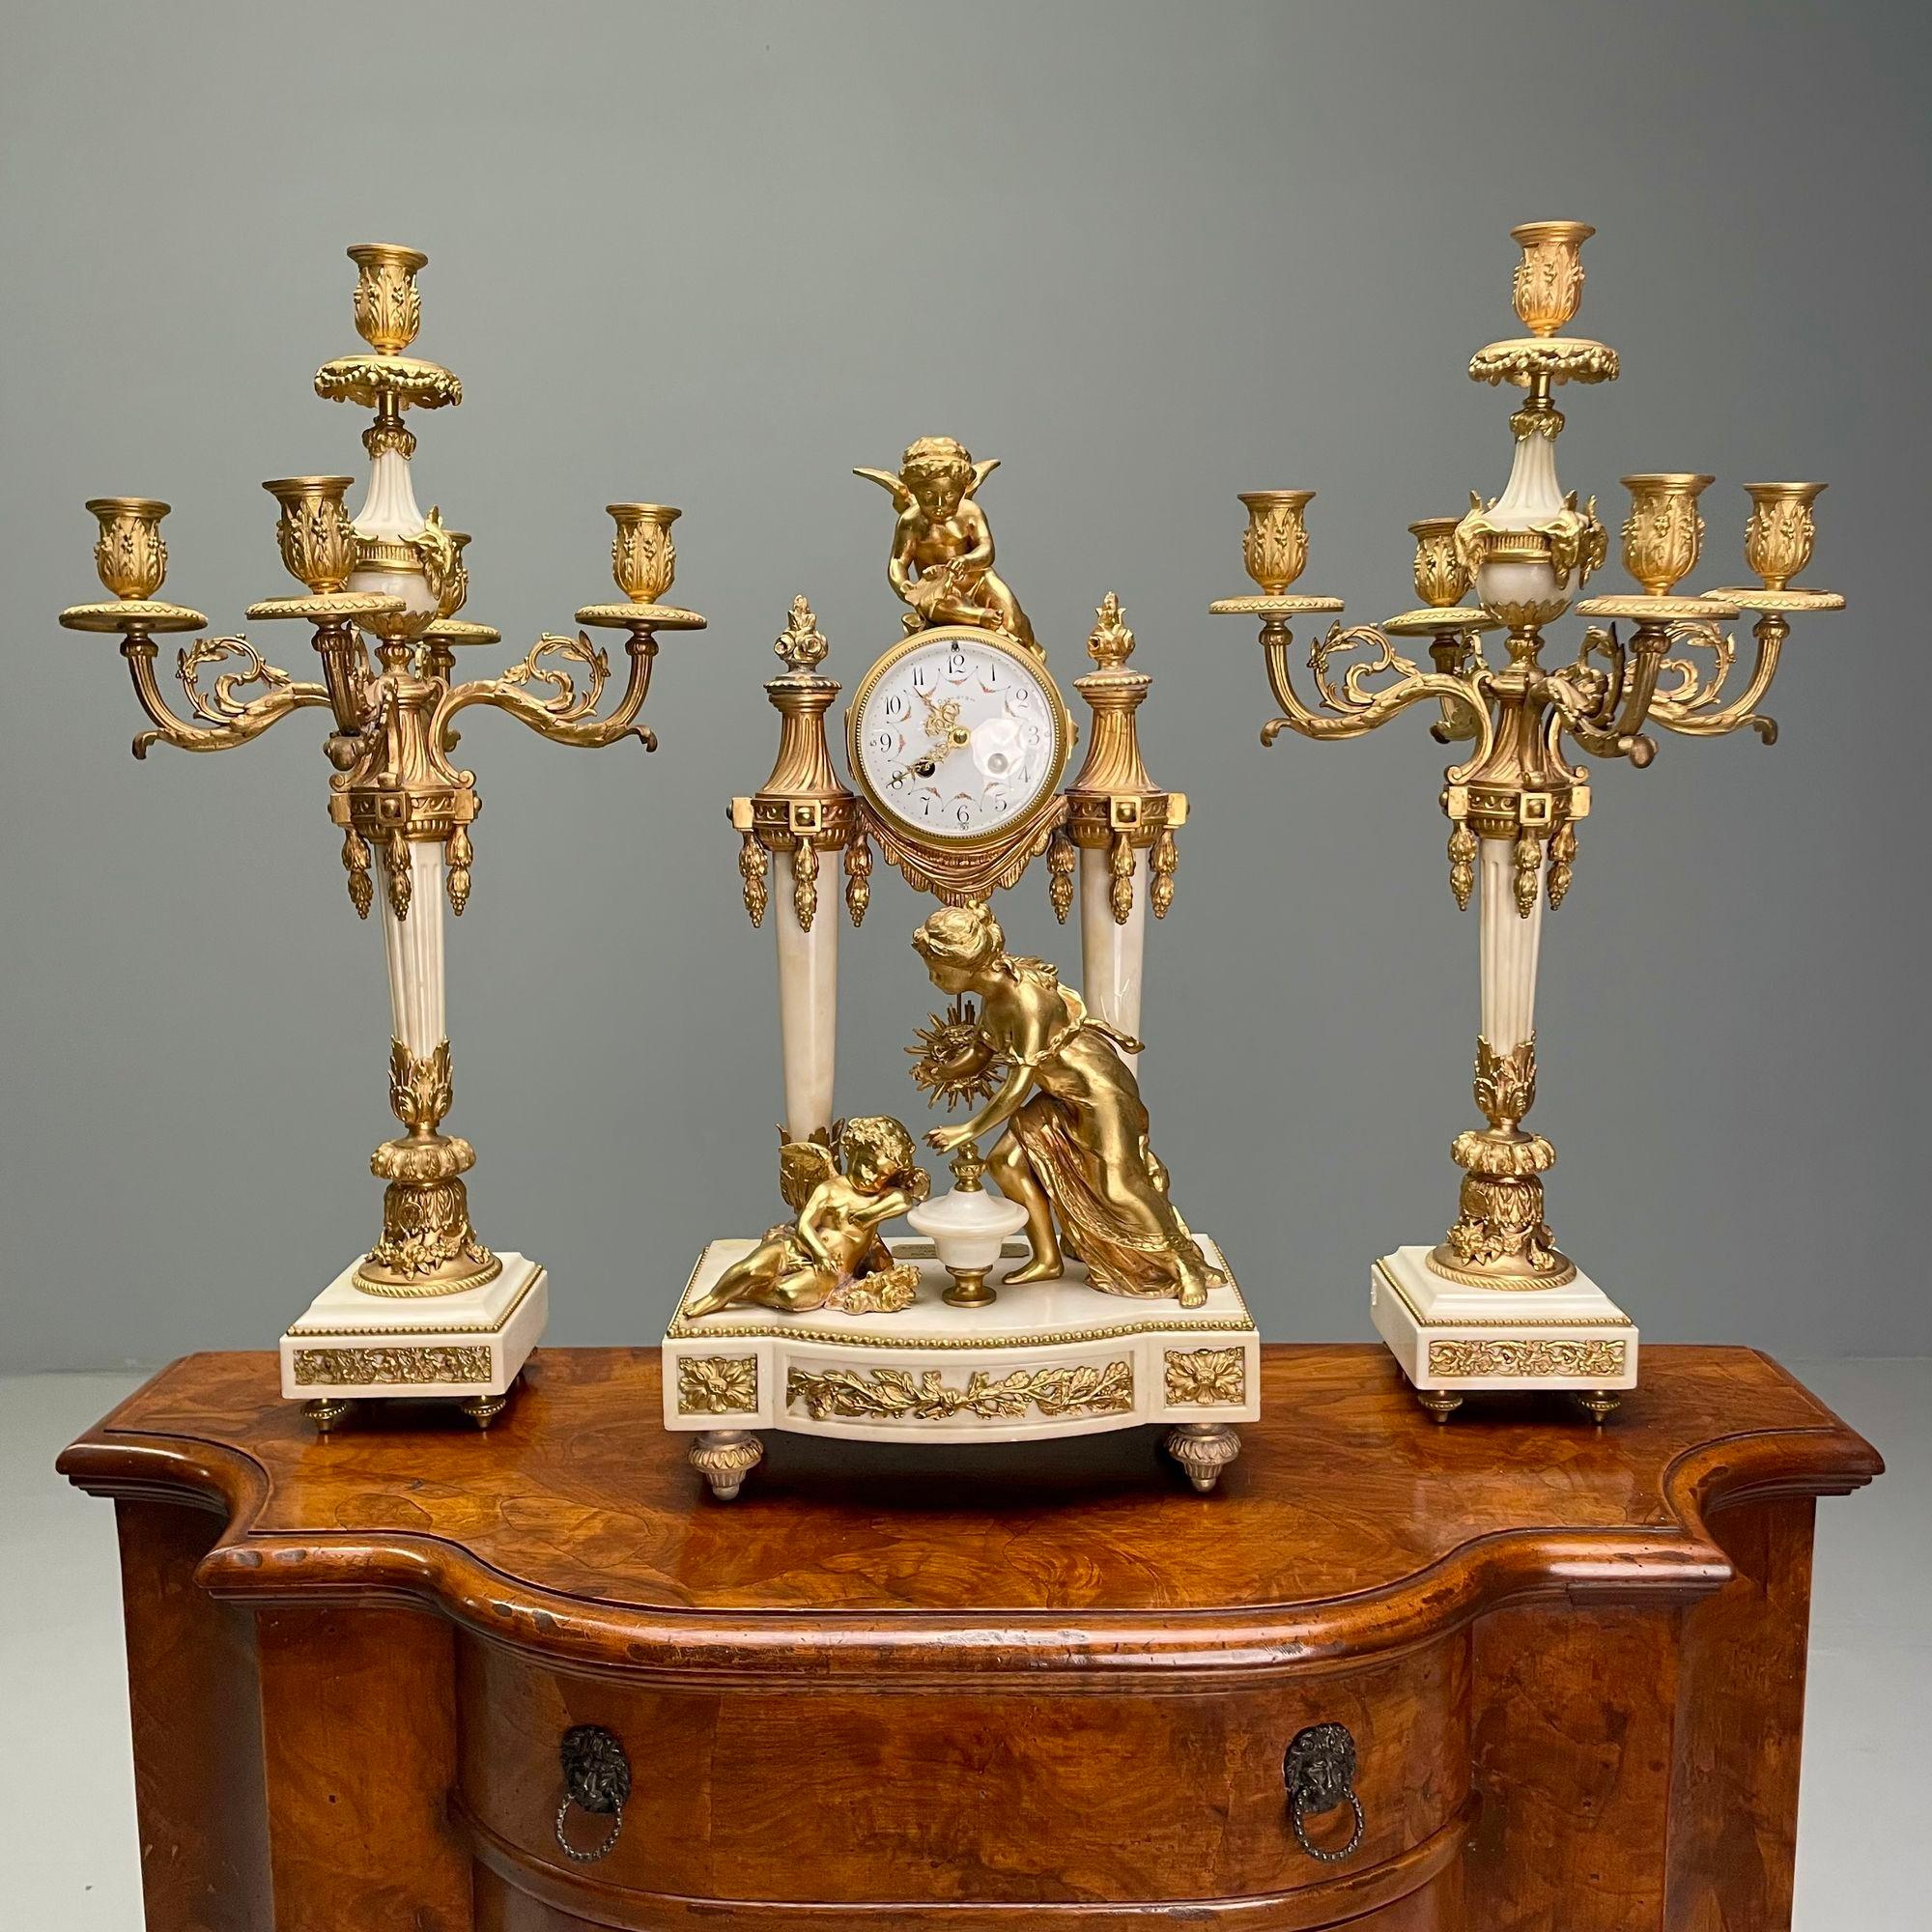 Louis XVI Style, Three Piece Clock Garniture, Gilt Bronze, Marble, France, 1920s

A finely cast bronze and marble clock set depicting Leto and her Children Apollo and Diana. The set having a Made in France Foundry Stamp and a Plaque marked Auguste